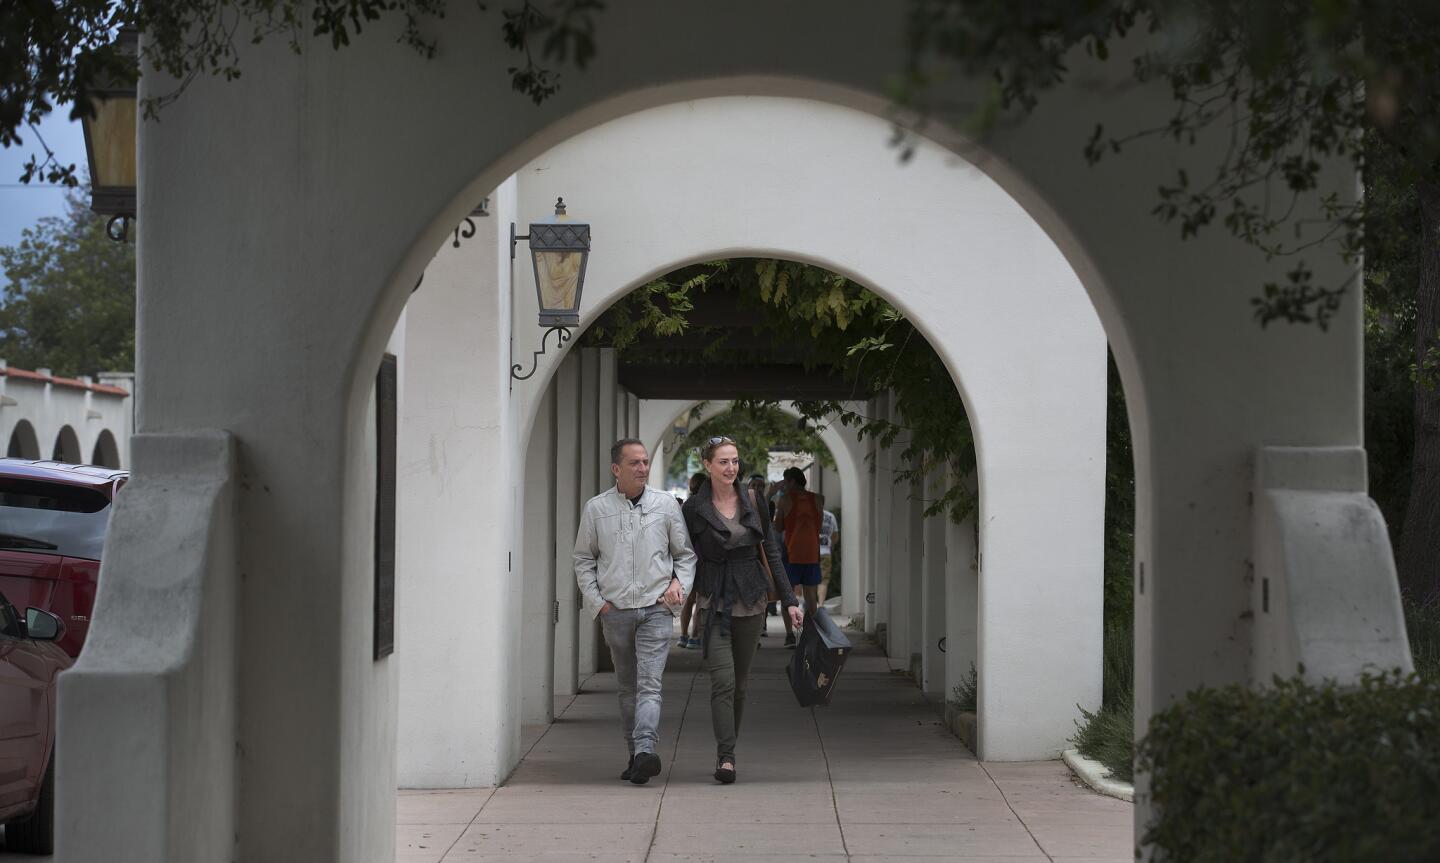 Picturesque spots in Ojai, Calif., include the pedestrian arcade along Ojai Avenue. Though small, the Ventura County town is home to a range of activities, including olive oil tasting, stays at posh Ojai Valley Inn & Spa and the yearly Ojai Music Festival.